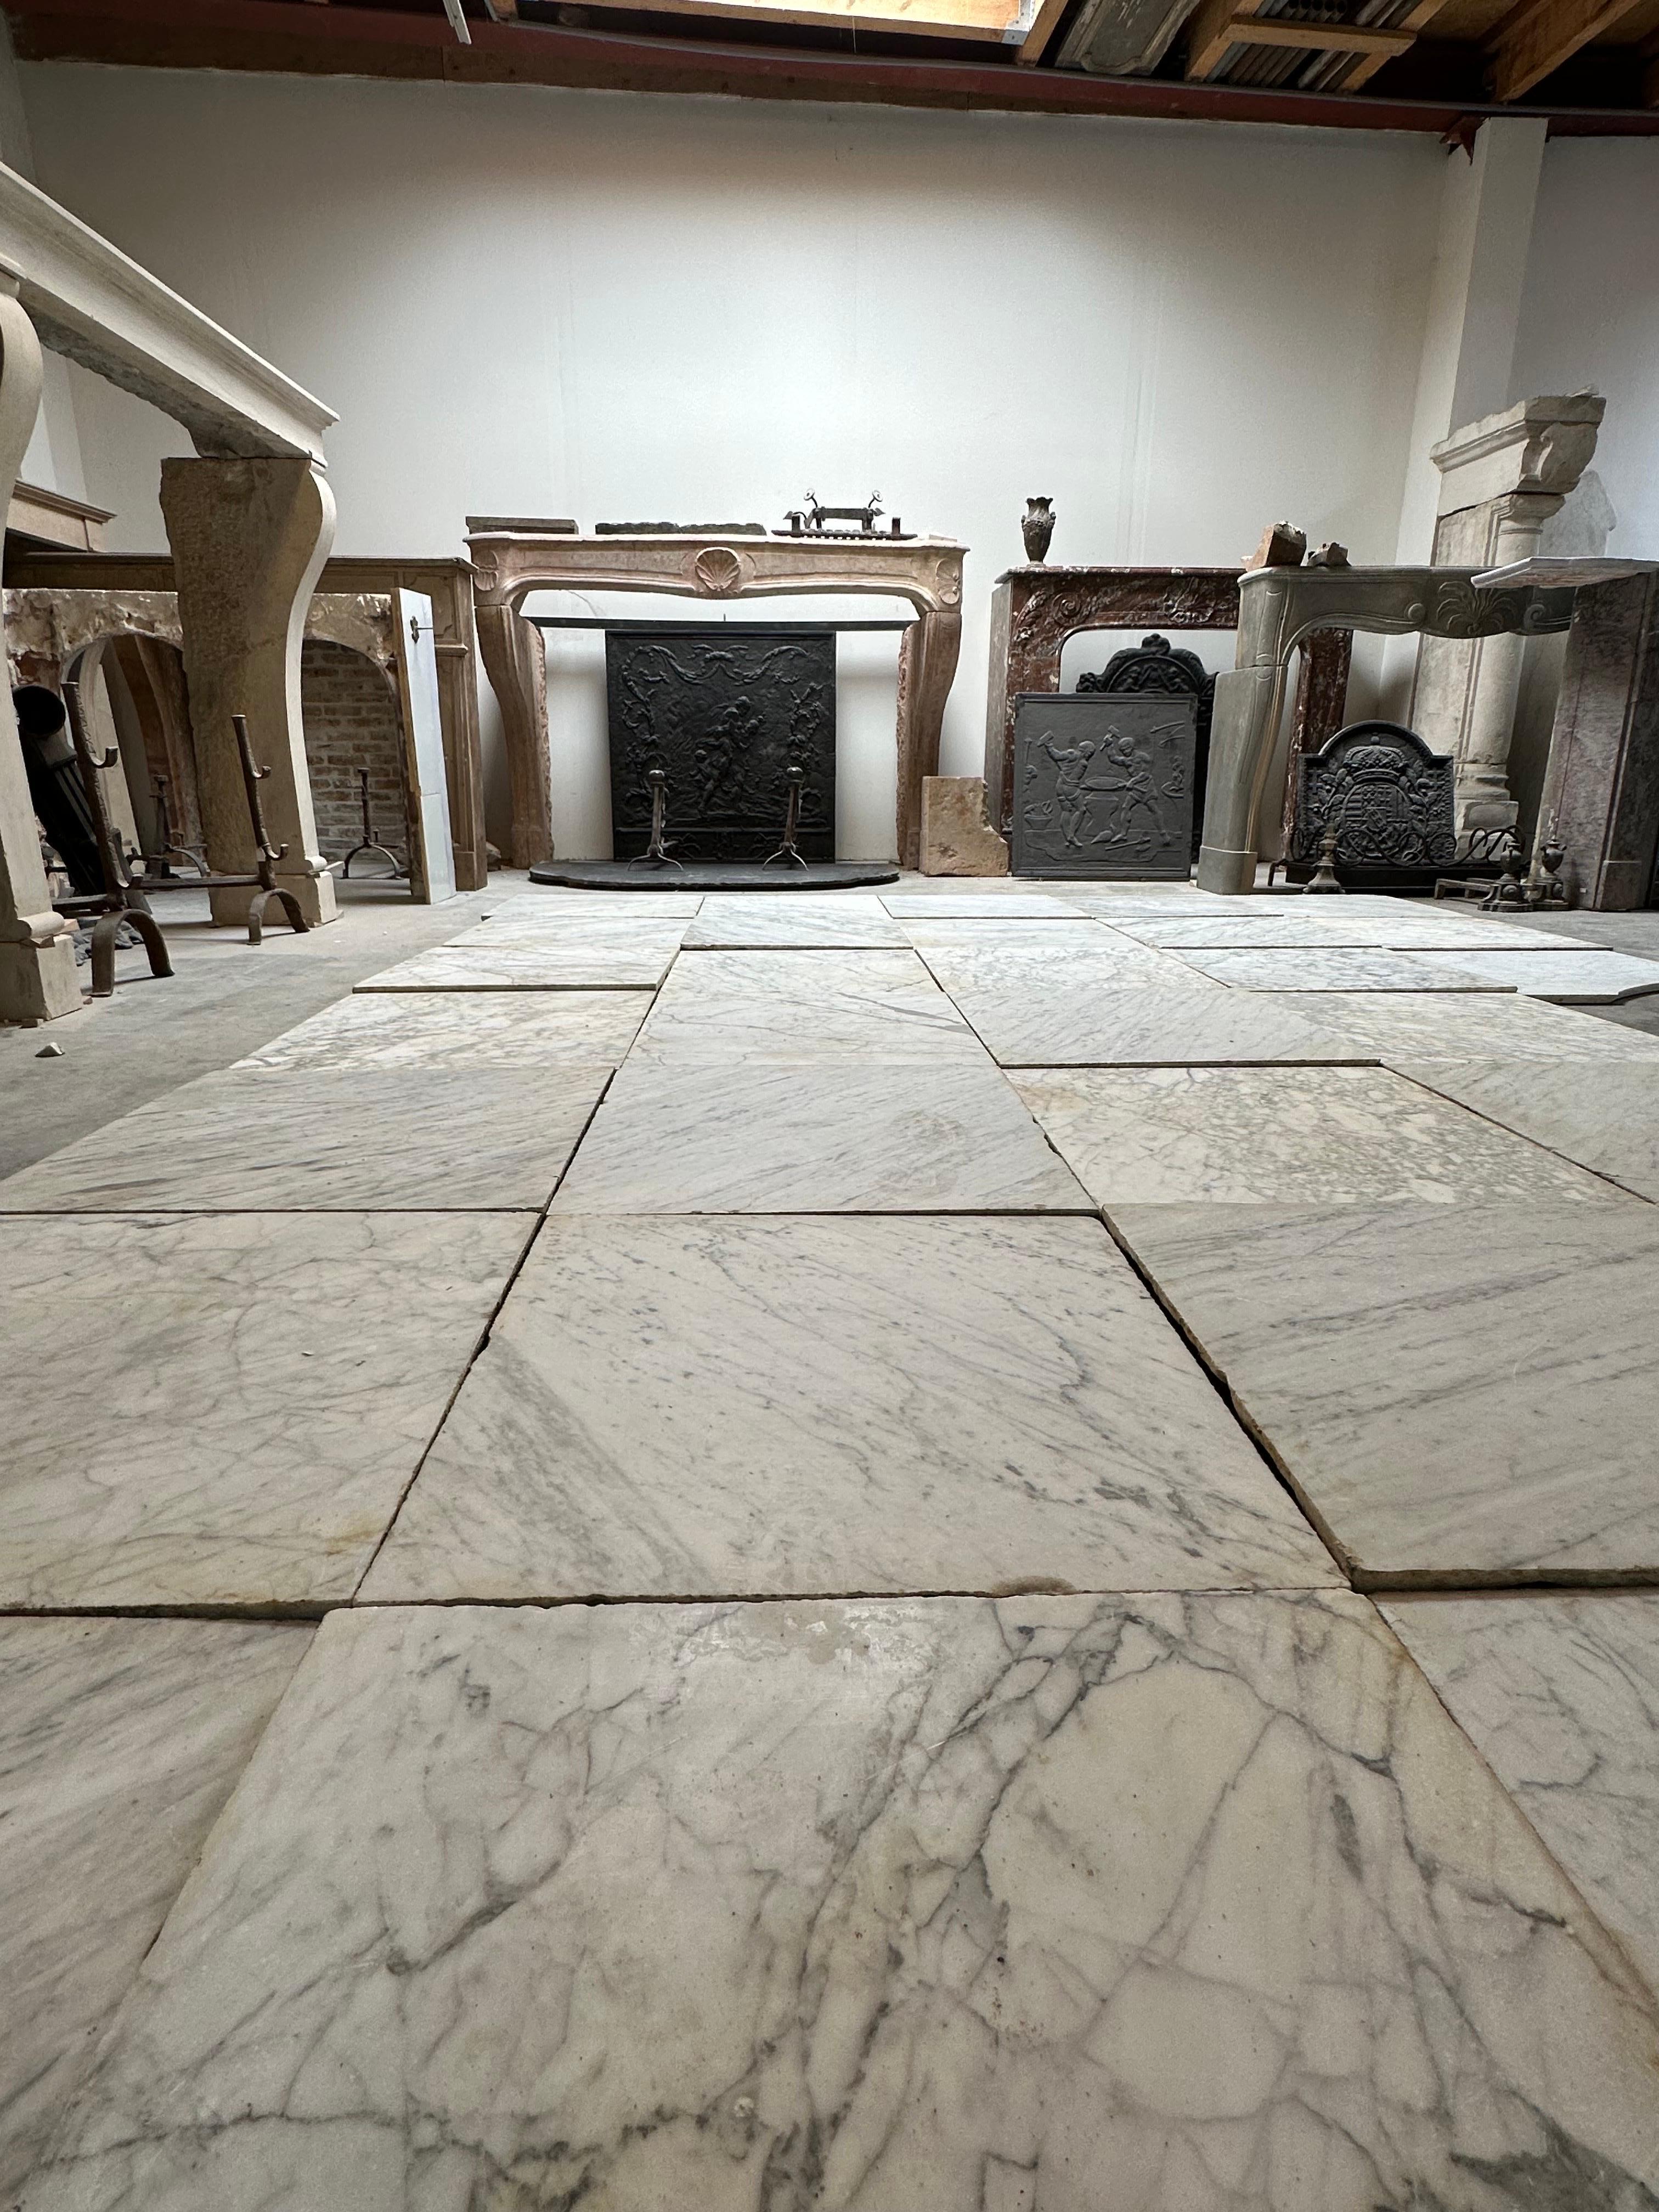 Beautiful Lot Of Reclaimed Antique Carrara Marble Floor Tiles.

These large tiles come from a well sized entrance of a canal house in the city center of Amsterdam.
The have a lovely patina with great presence and history.

As shown here the